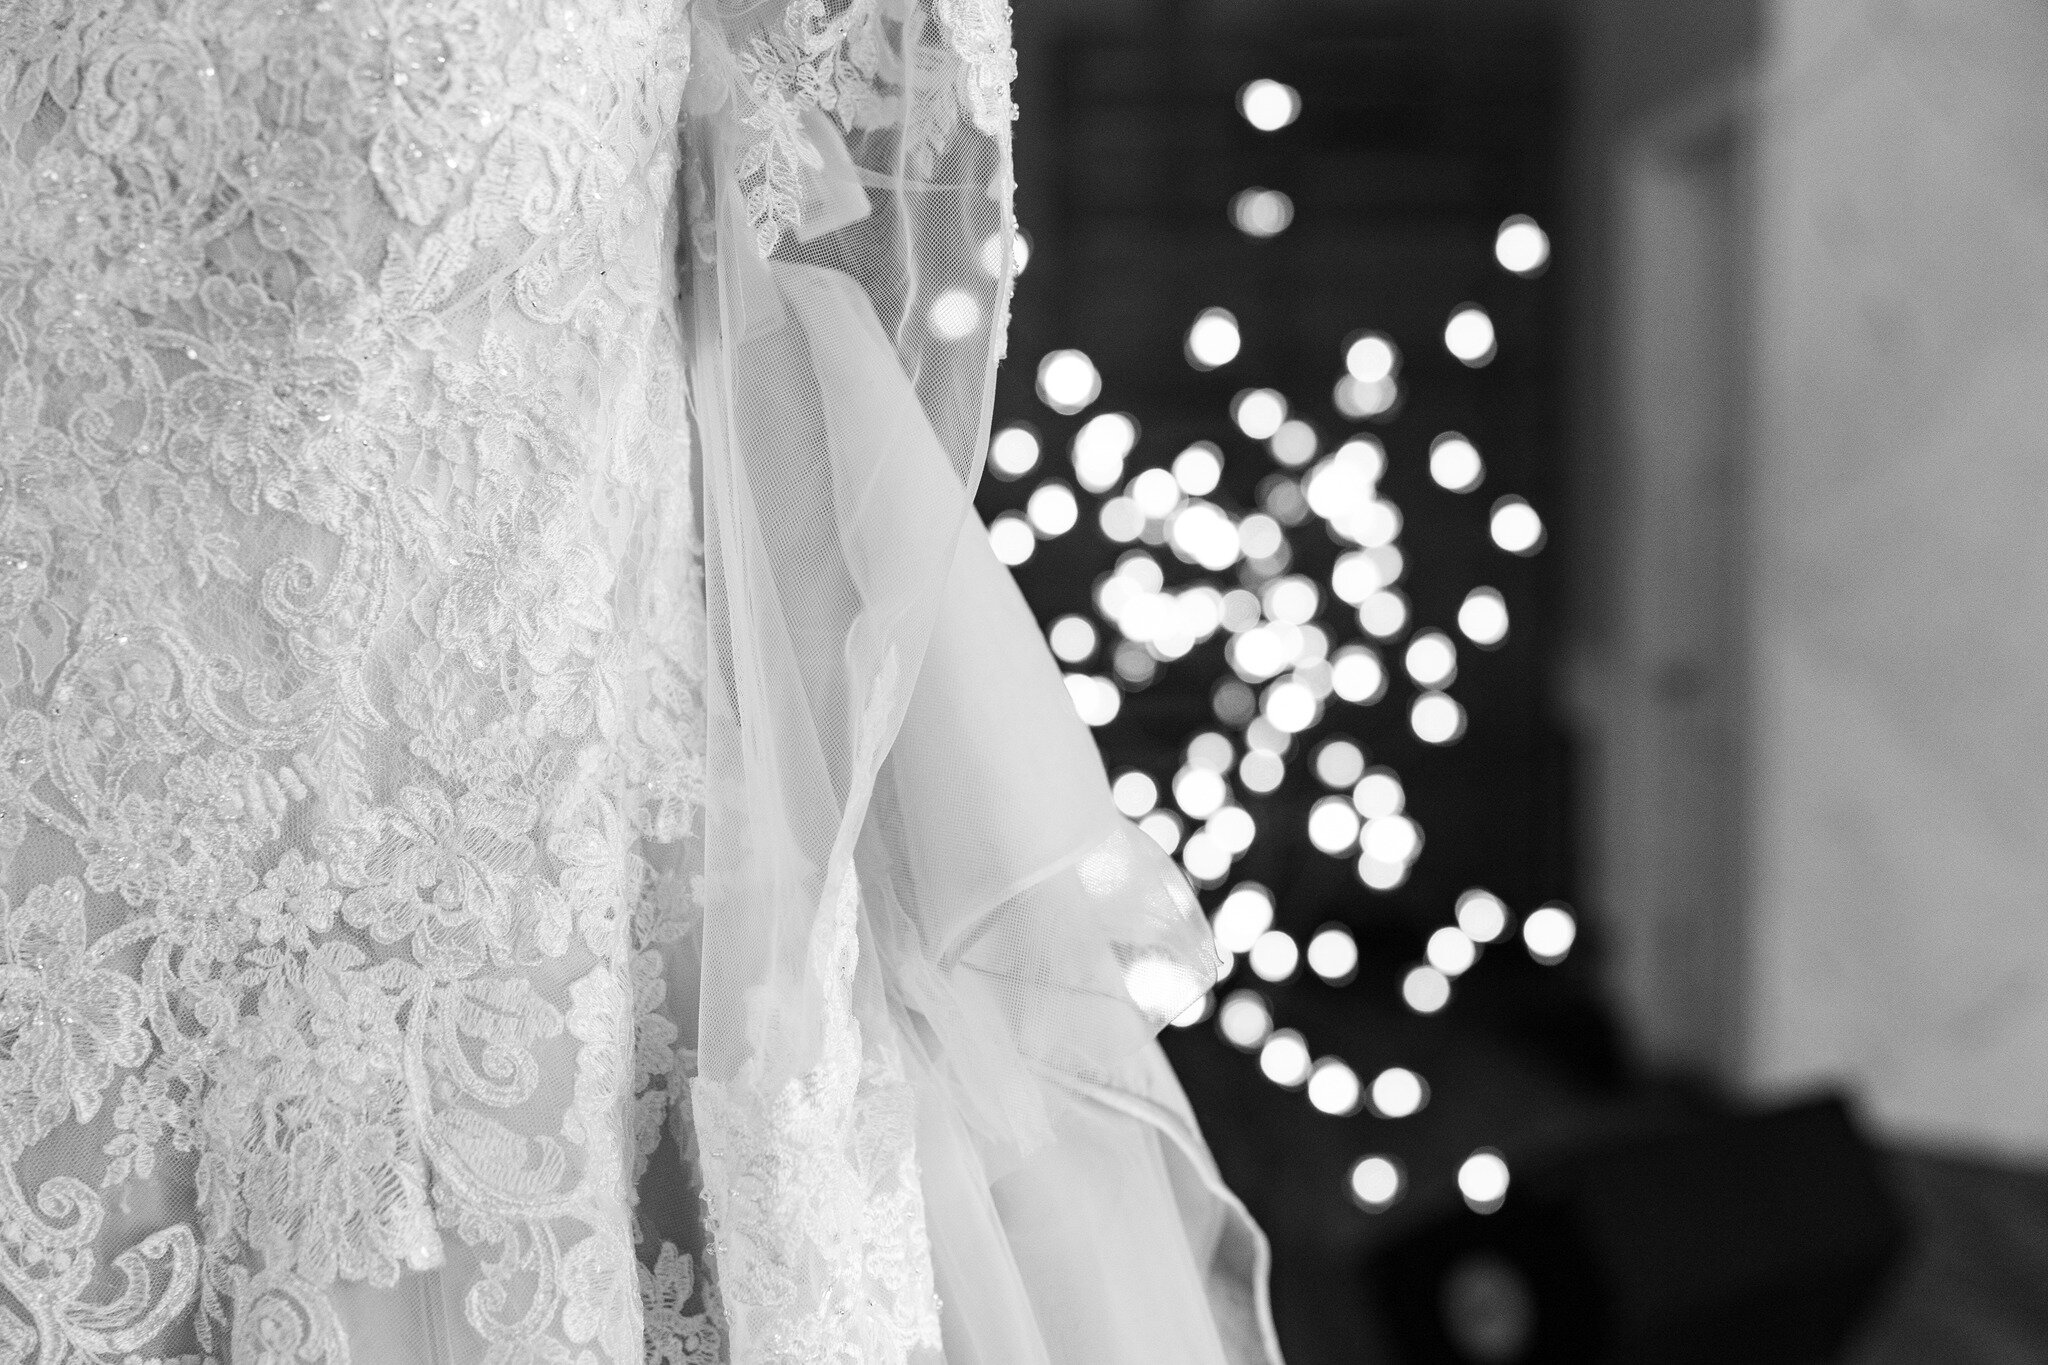 Wedding Details💍📸

A few lovely detail shots from Zach and Kami's special day ❤️

Silly stuff for the algorithm:
 #justengaged#wedding #weddingphoto #weddingphotography #weddingportrait #weddingdress #weddingguest #weddingideas #weddinginspiration 